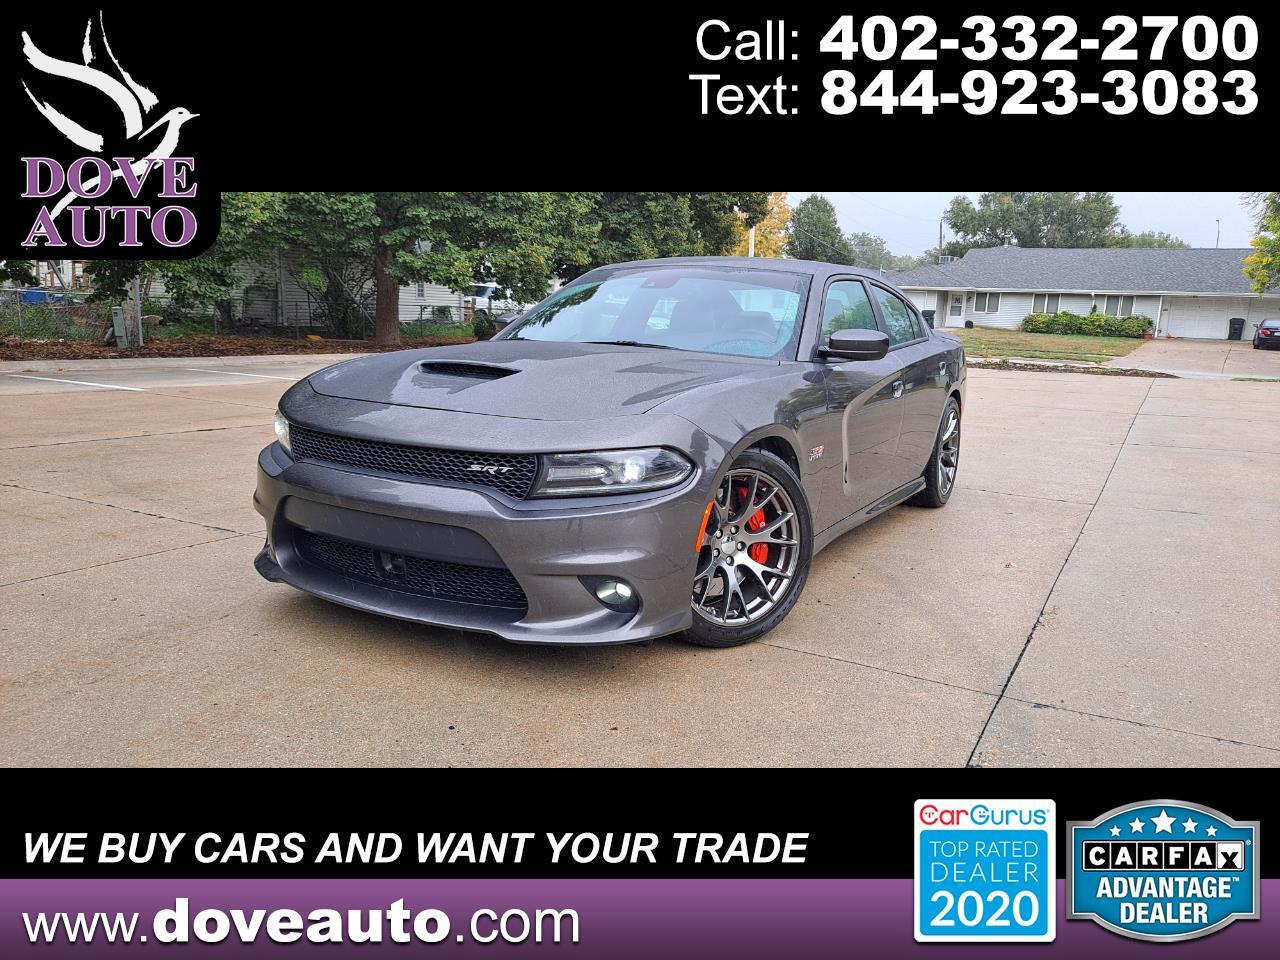 2015 Dodge Charger 392